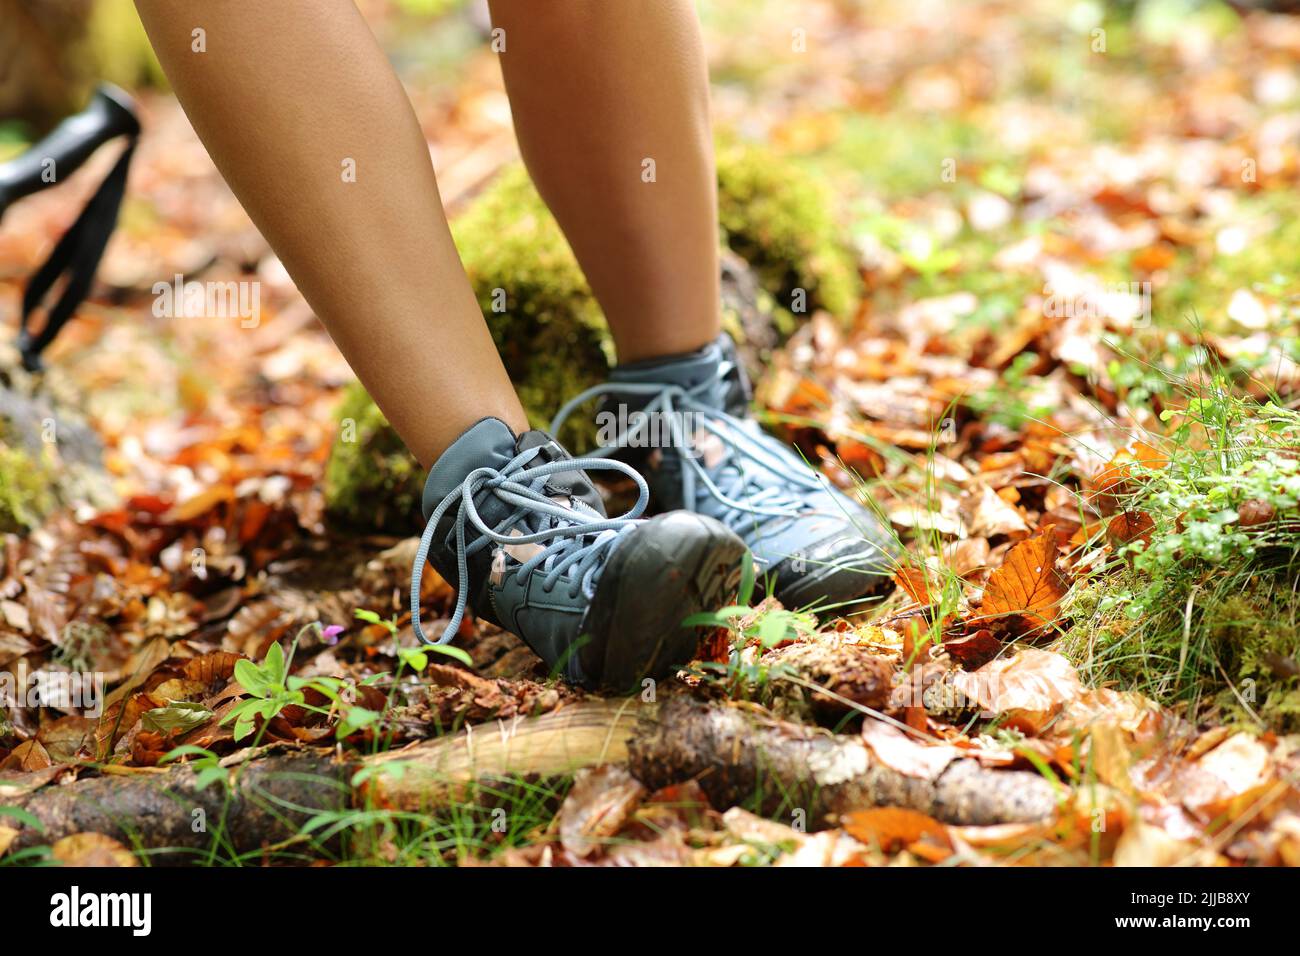 Close up portrait of a trekker stumbling suffering sprain on ankle in a forest Stock Photo